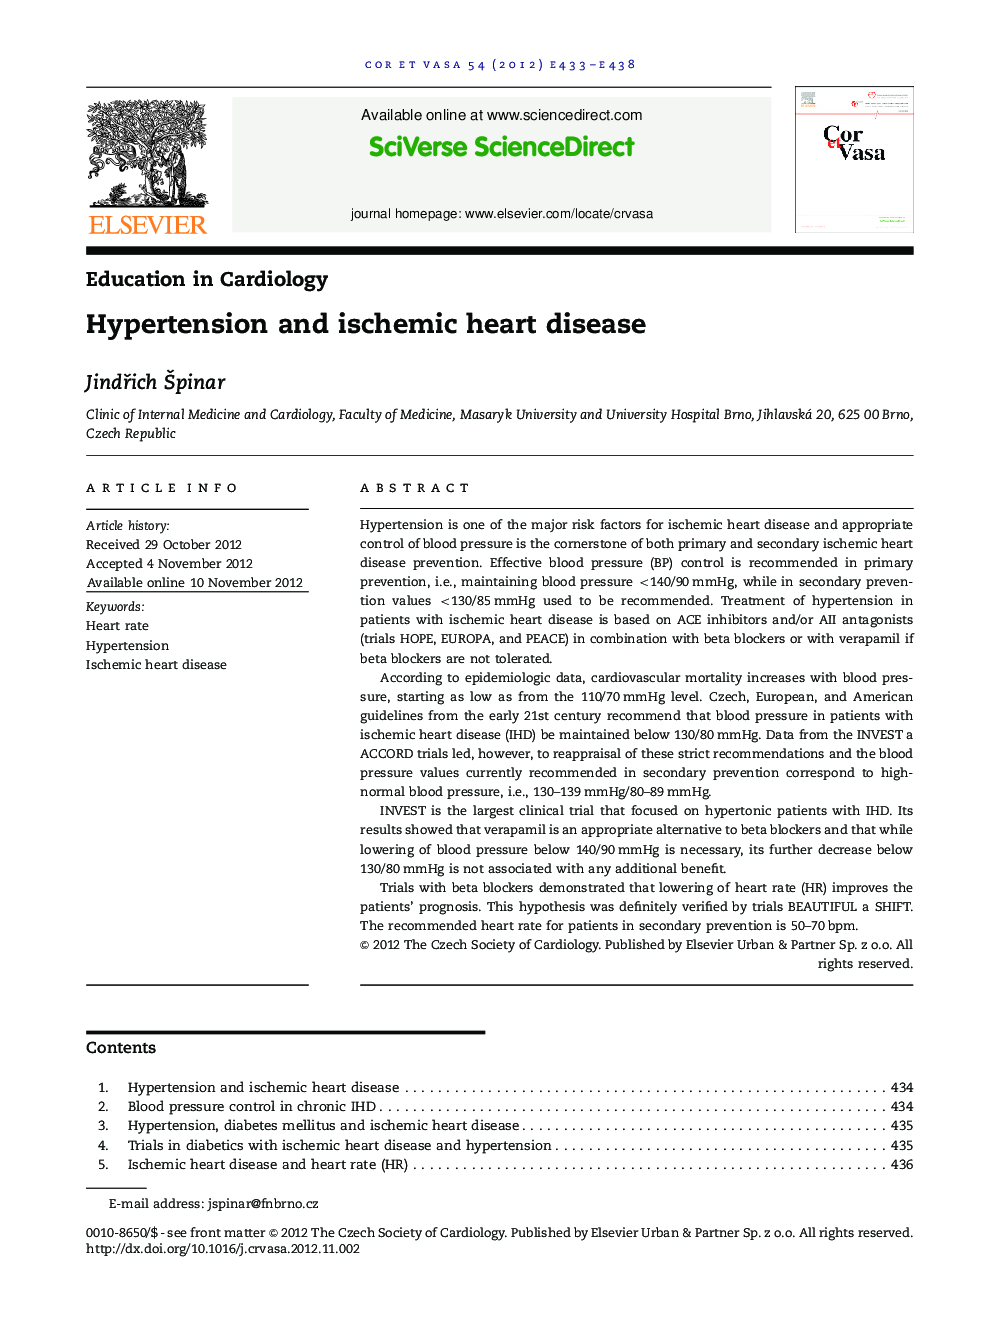 Hypertension and ischemic heart disease